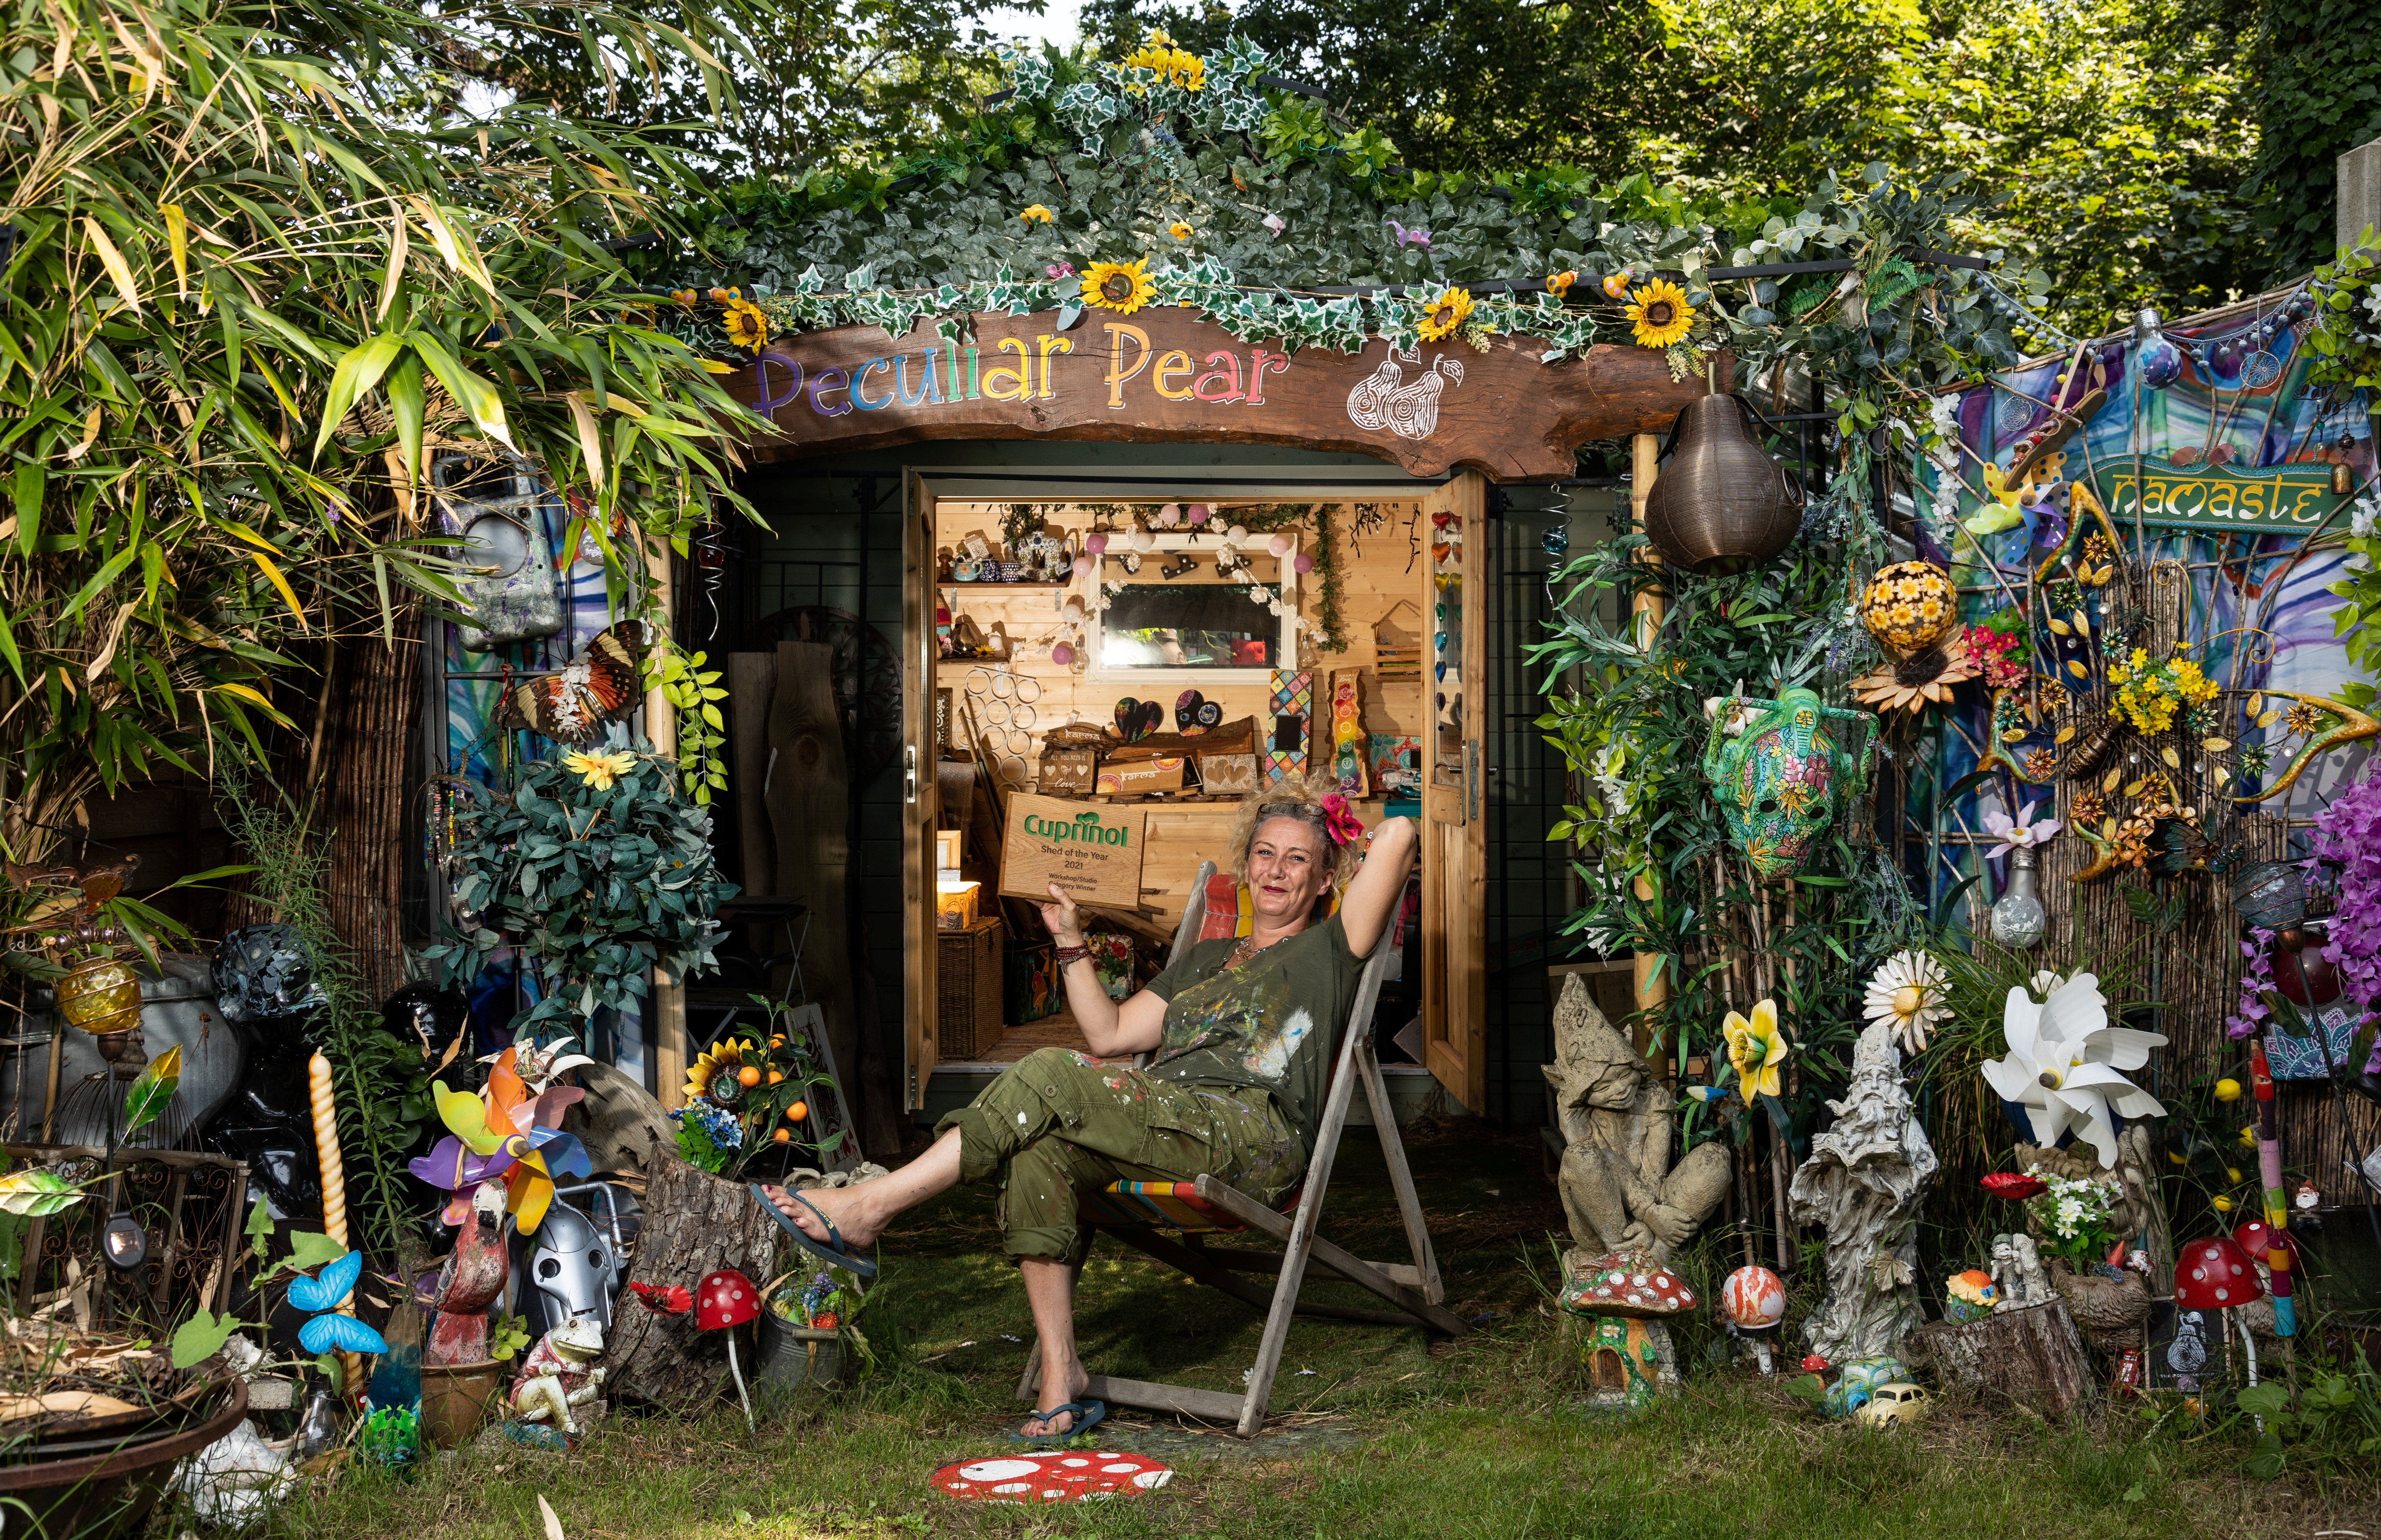 Ally Scott’s shed ‘The Peculiar Pear’ won the Workshop/Studio Category in Cuprinol’s Shed of the year competition 2021 (Cuprinol Shed of the Year)